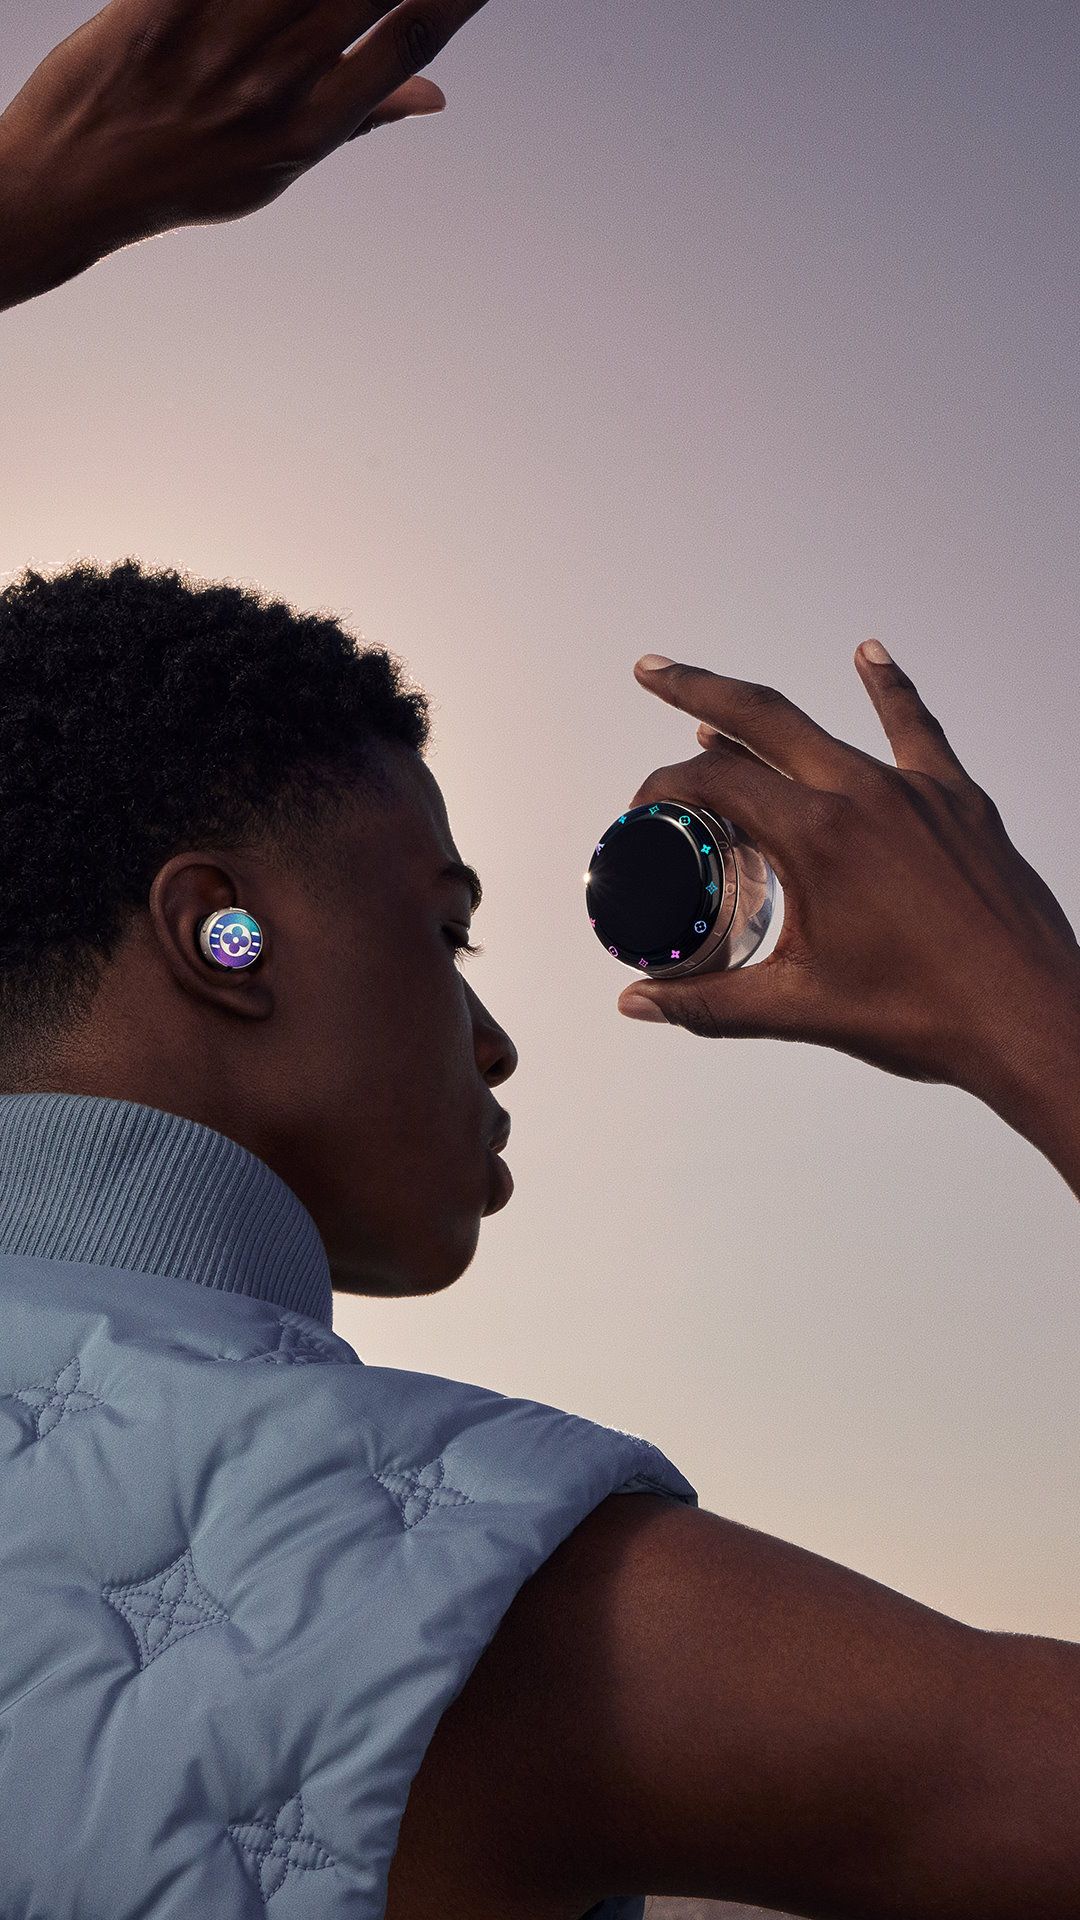 These Louis Vuitton Wireless Earbuds Will Make You Forget